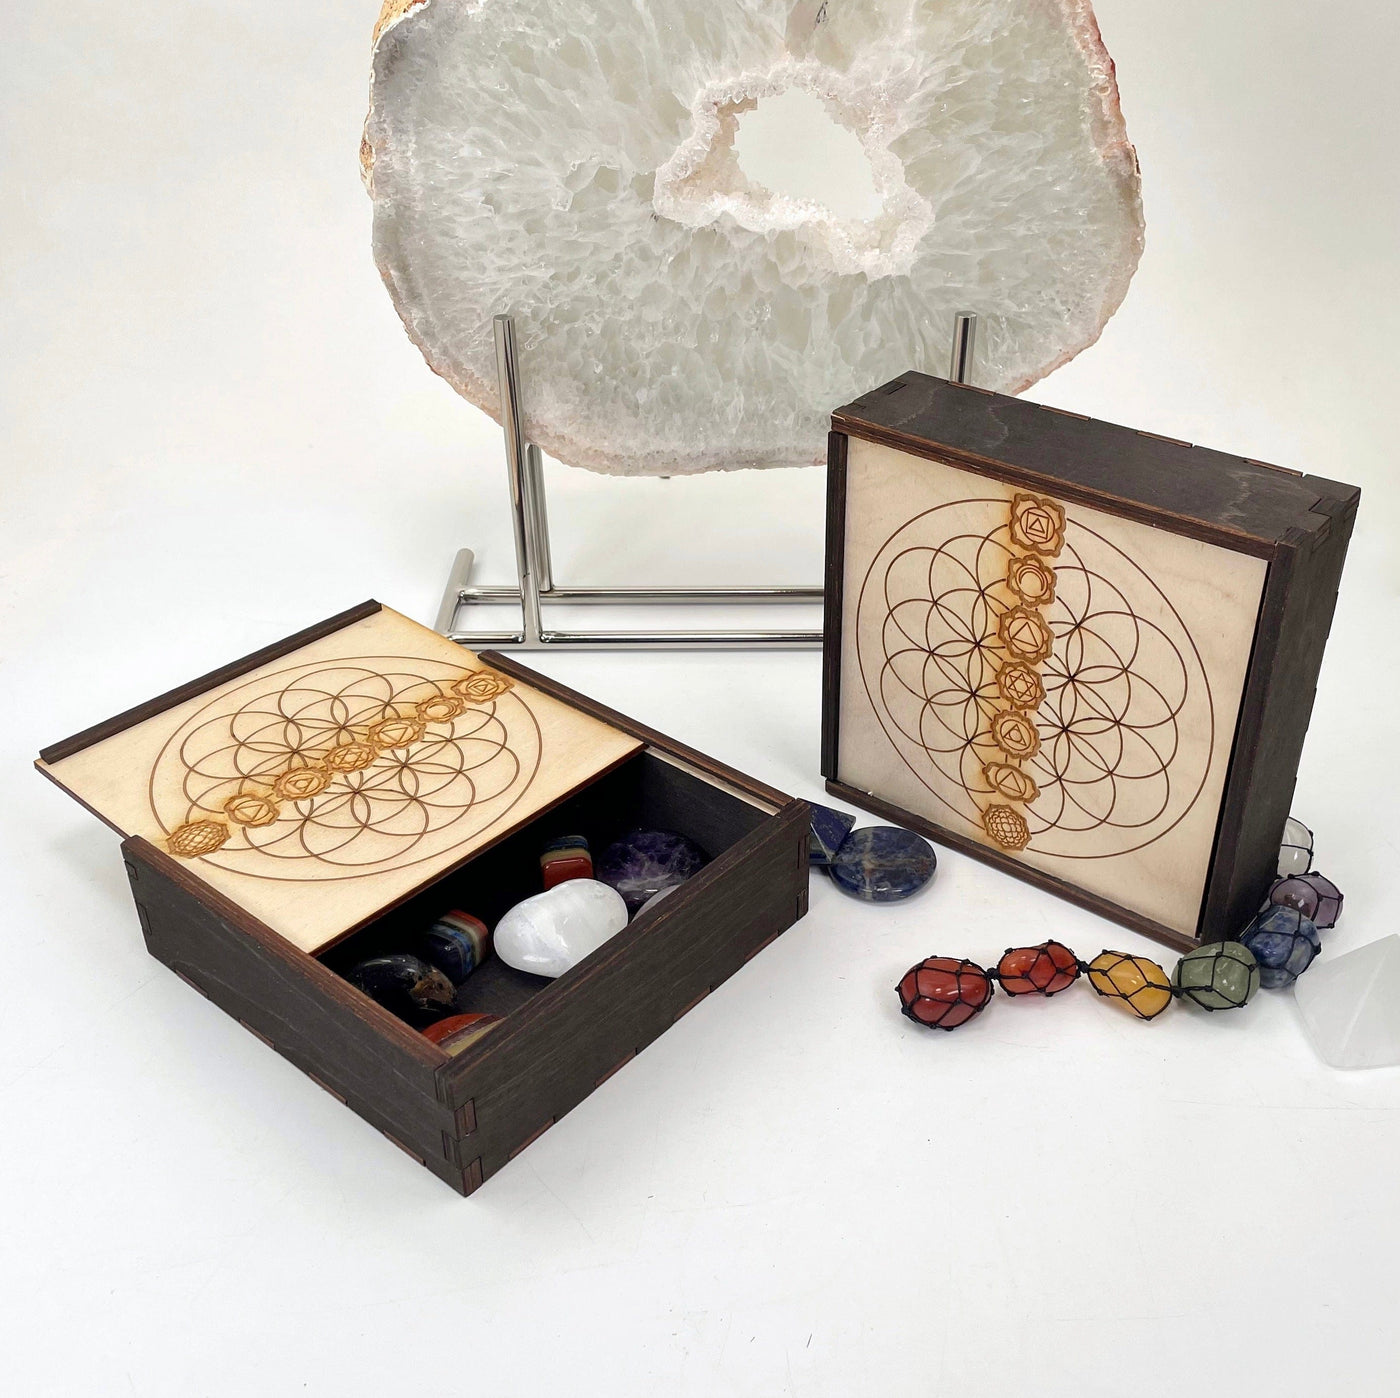 flower of life with seven chakra wooden storage box displayed with crystals inside (not included with purchase)